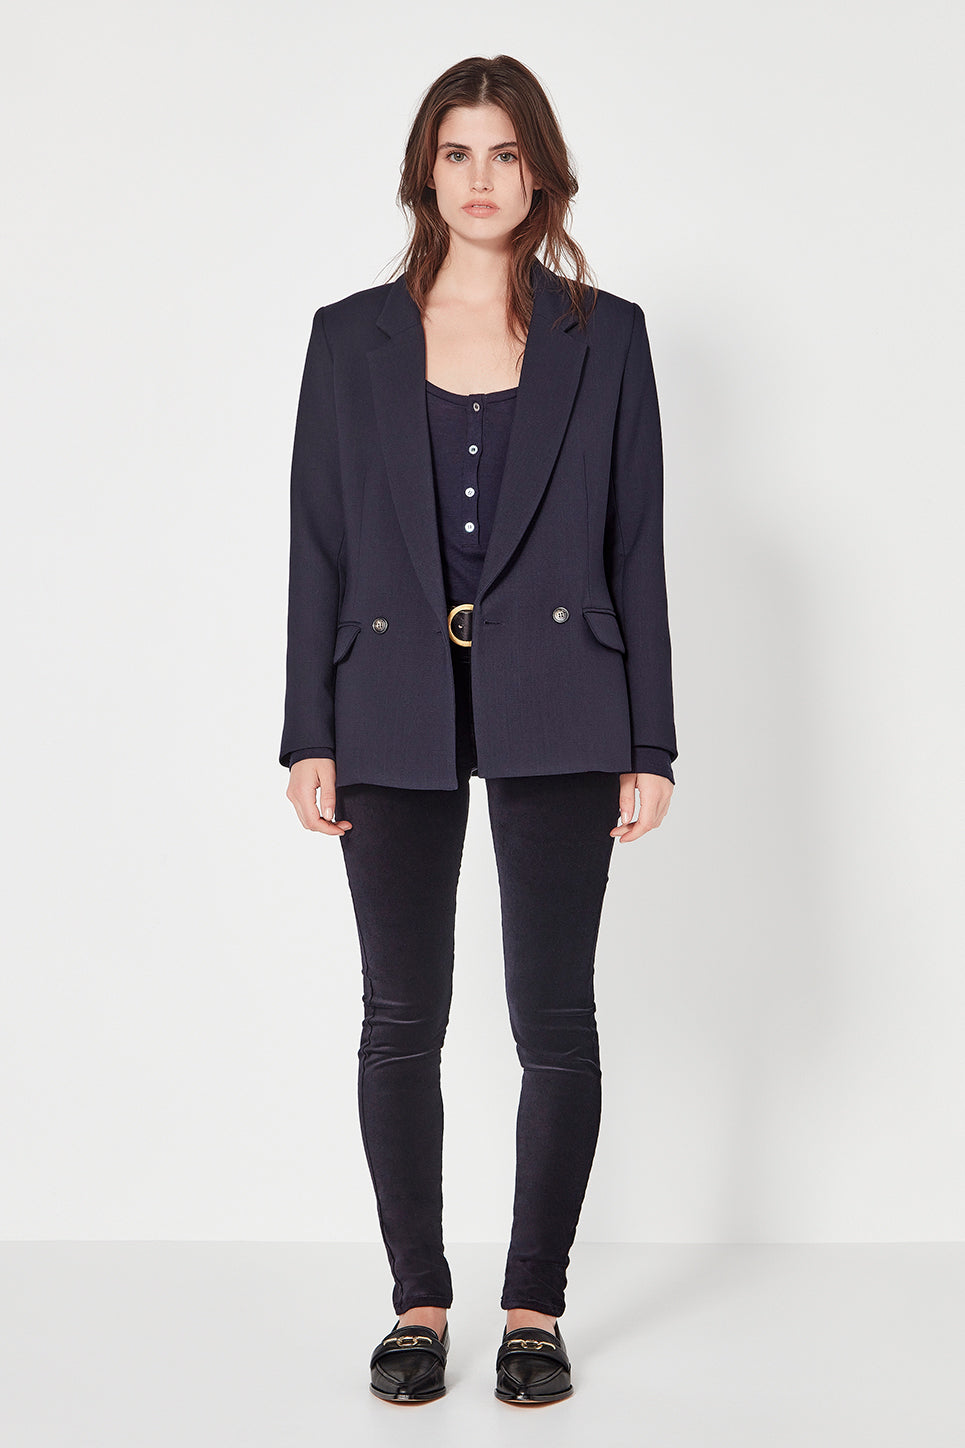 The Whitman Jacket in Navy